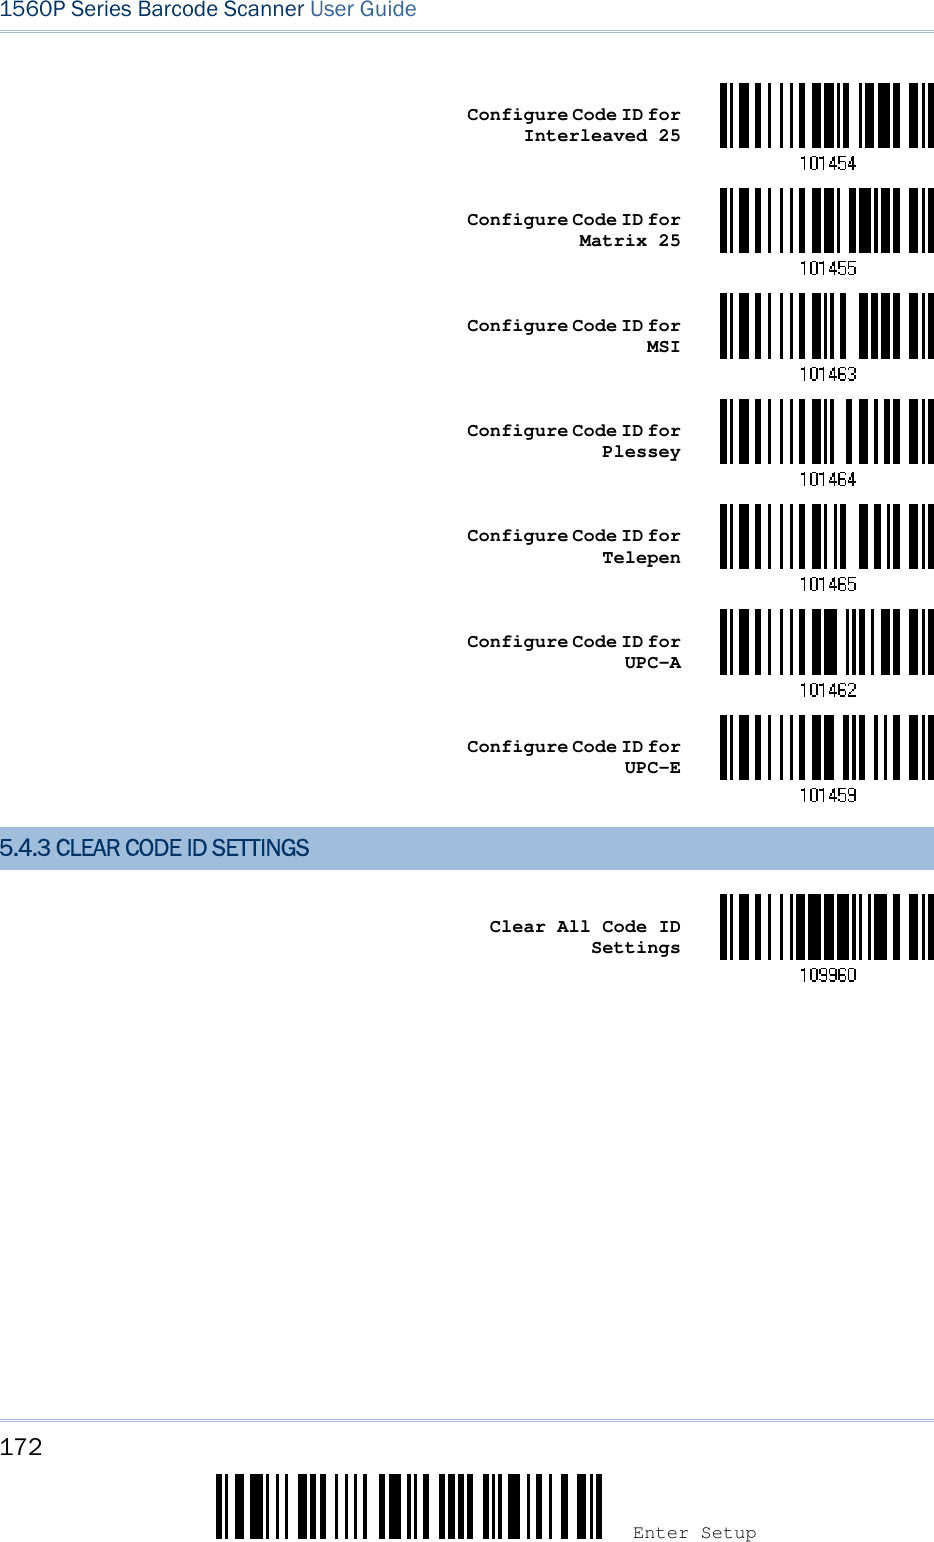 172 Enter Setup 1560P Series Barcode Scanner User Guide Configure Code ID for Interleaved 25 Configure Code ID for Matrix 25 Configure Code ID for MSI Configure Code ID for Plessey Configure Code ID for Telepen Configure Code ID for UPC-A Configure Code ID for UPC-E 5.4.3 CLEAR CODE ID SETTINGS Clear All Code ID Settings 